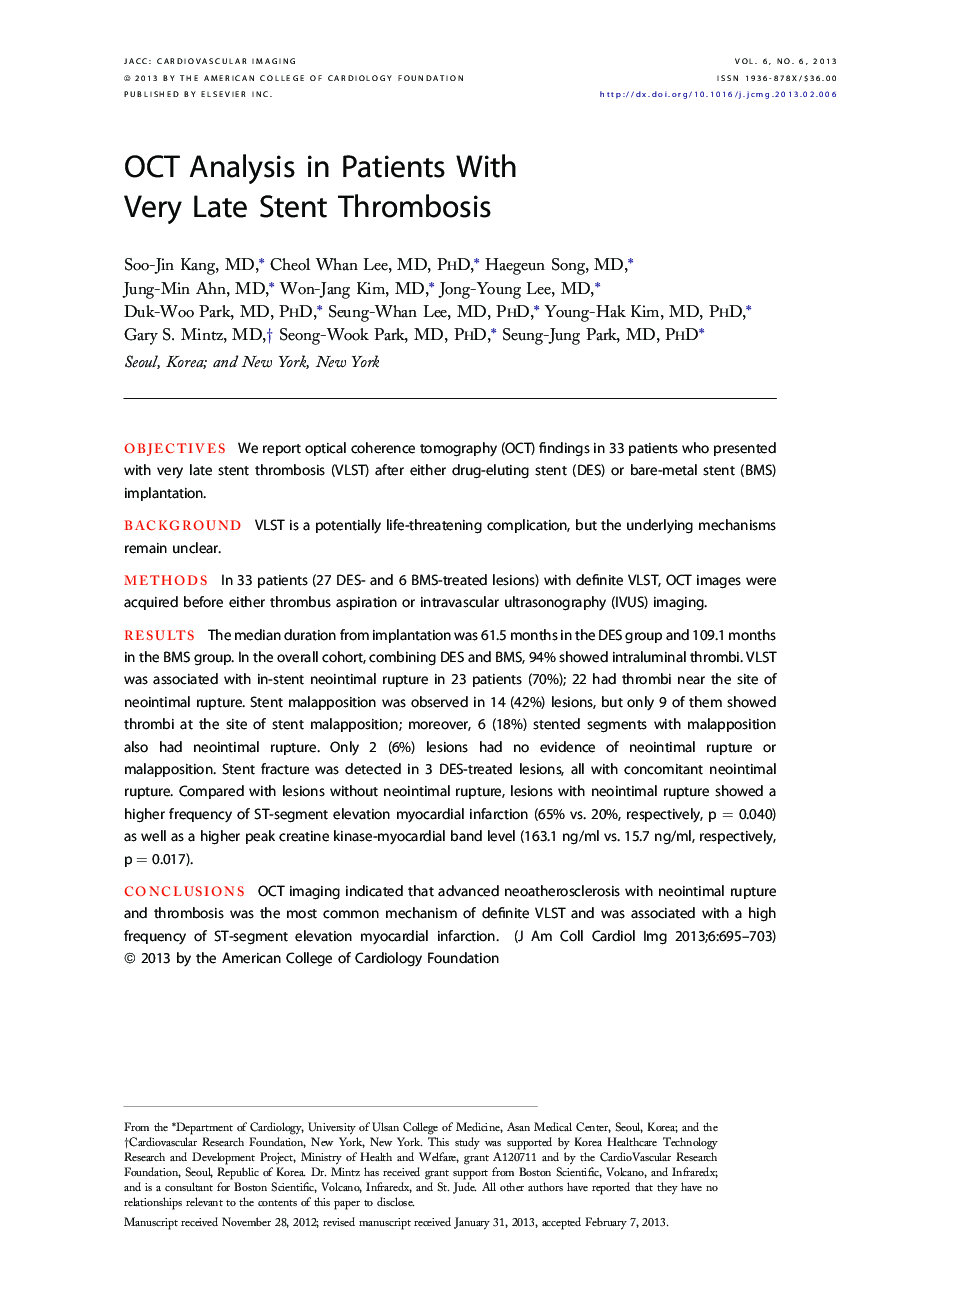 OCT Analysis in Patients With Very Late Stent Thrombosis 